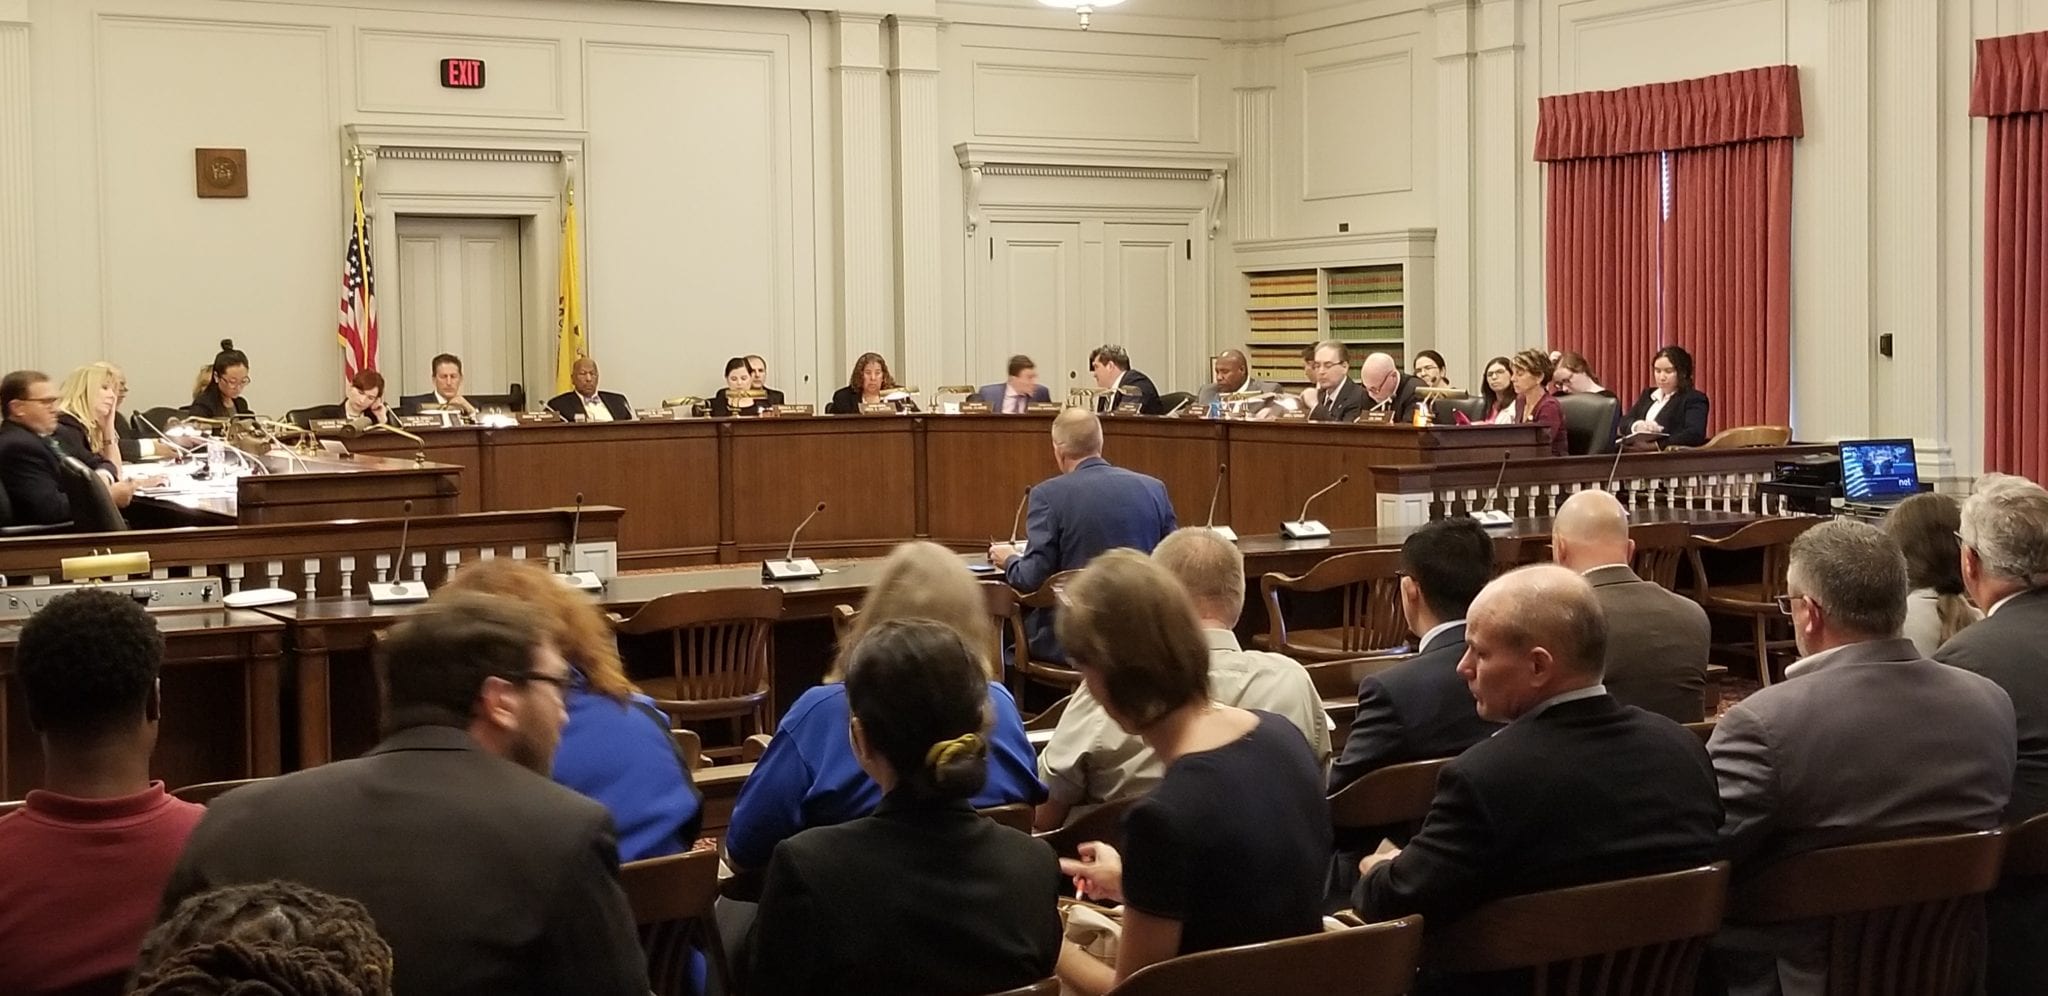 Plug Power Speaks to the New Jersey Assembly - Plug Power